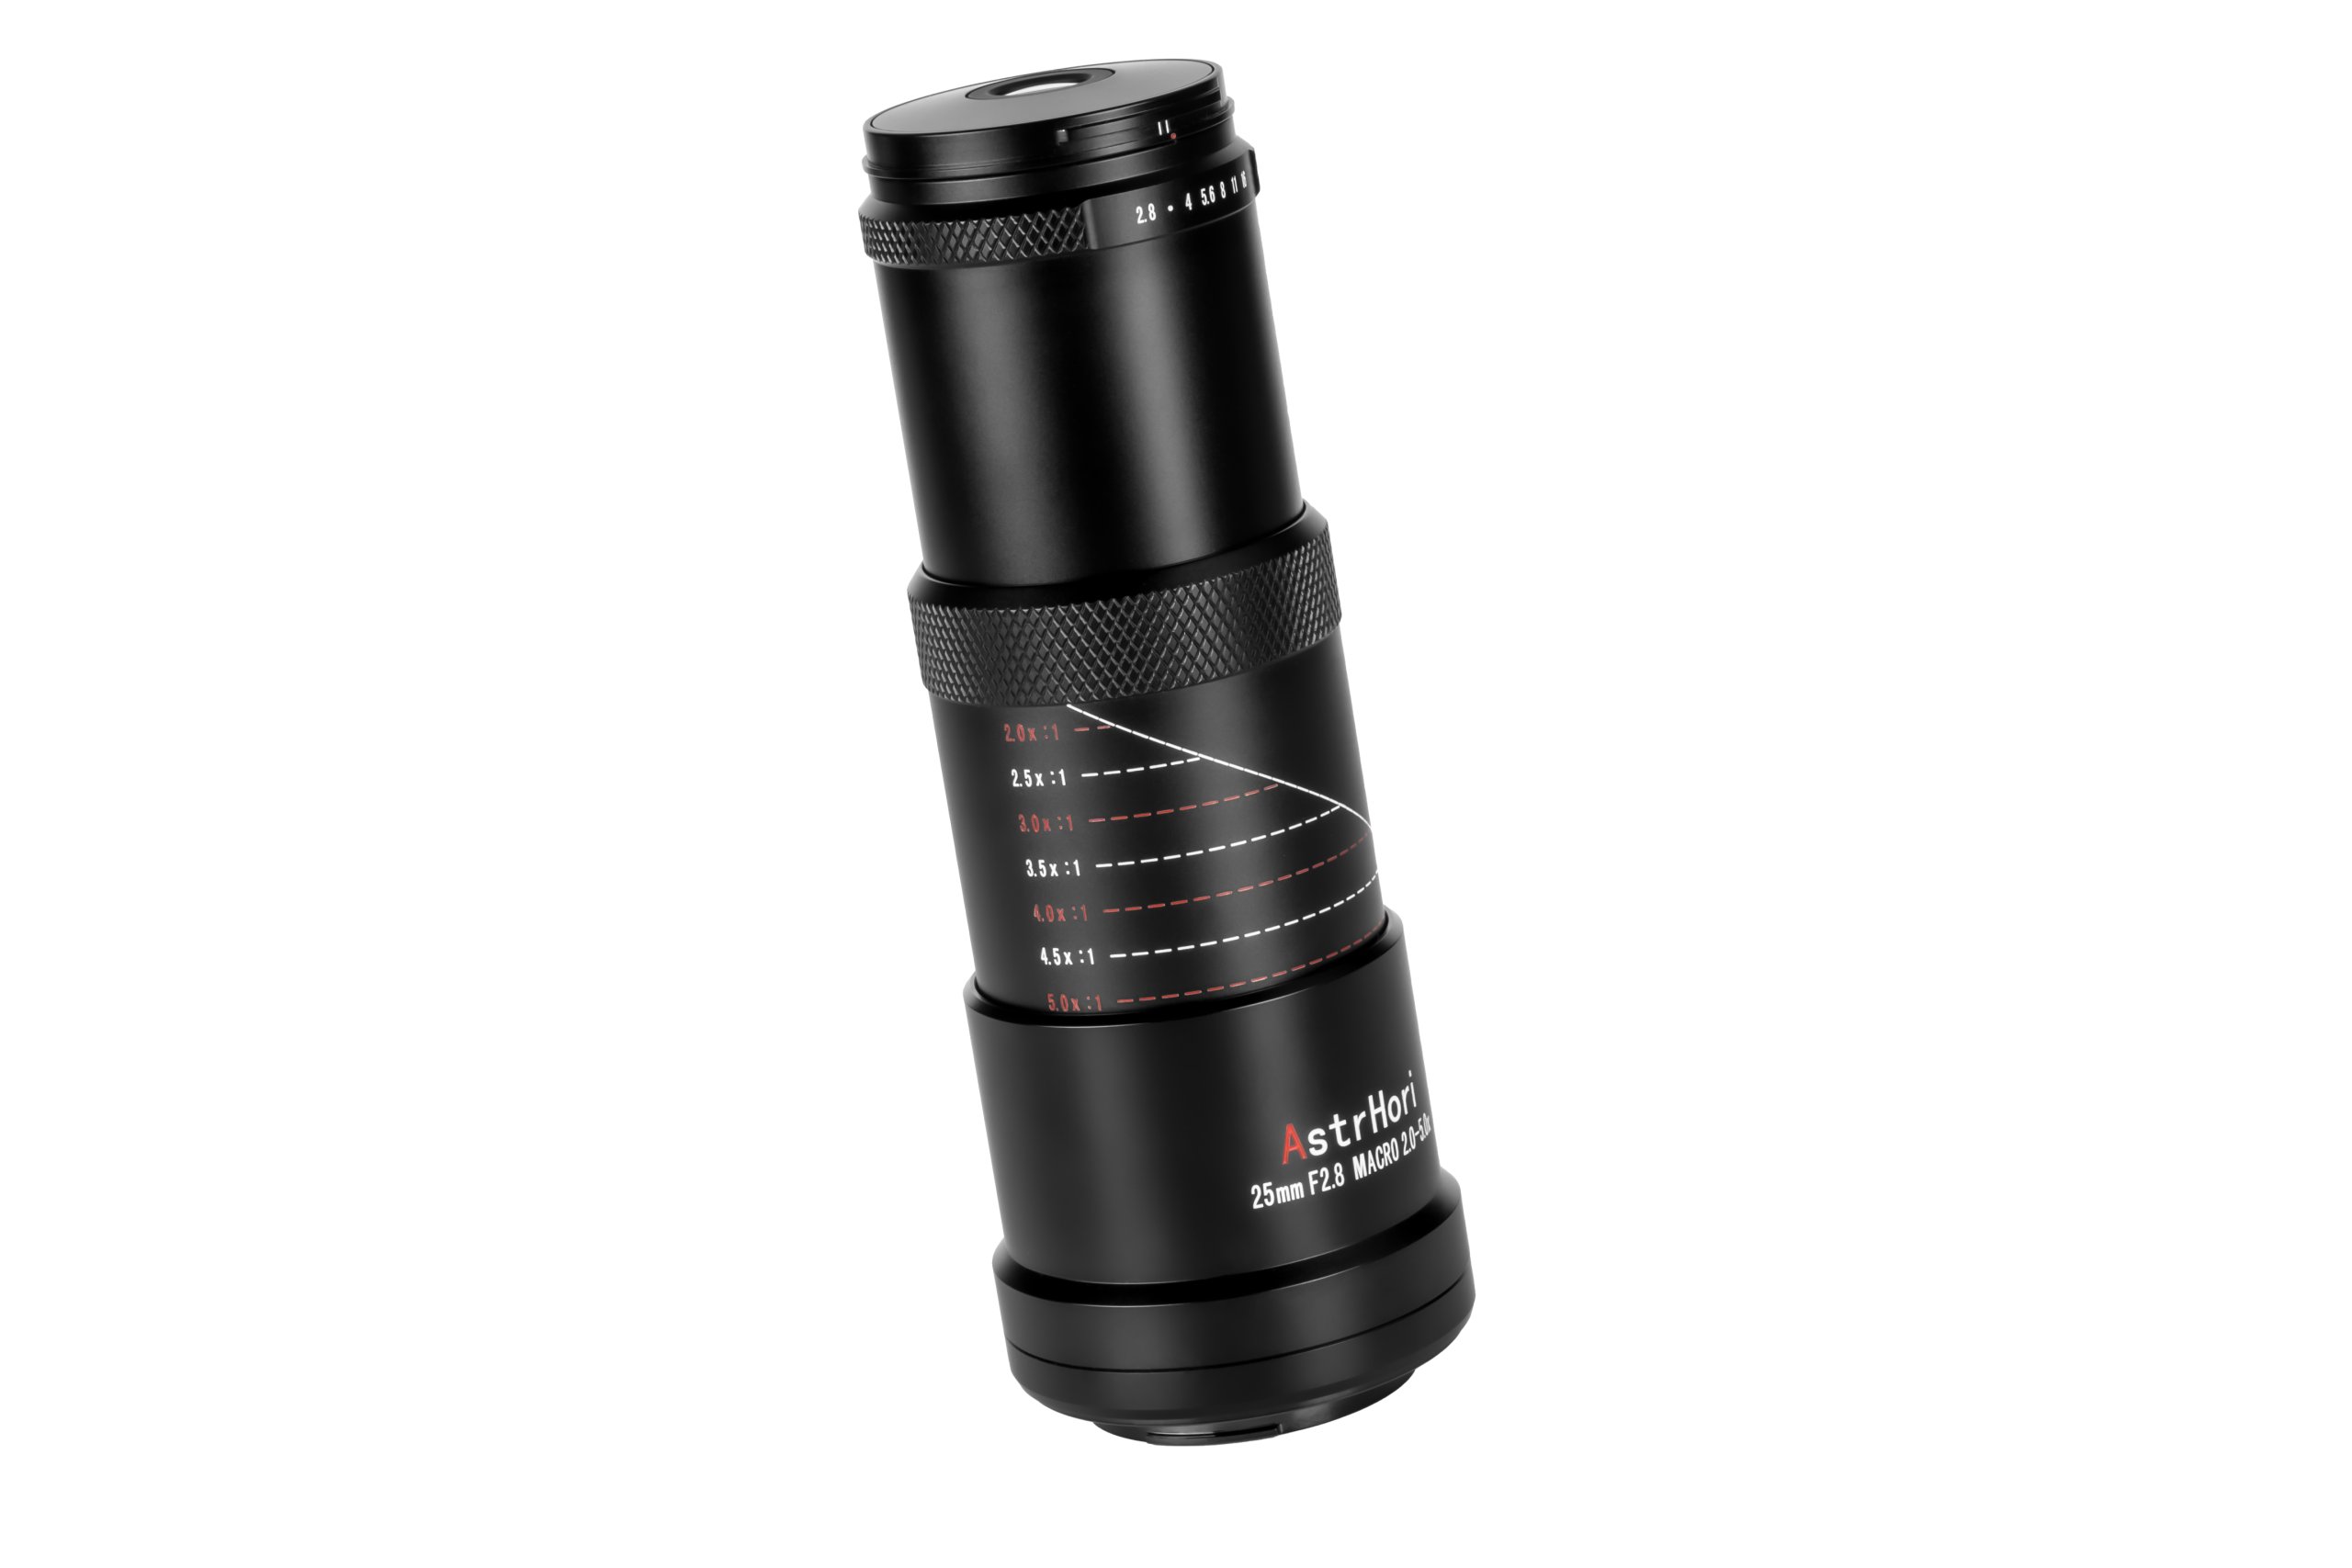 DSC03267 scaled - AstrHori to launch RF 25mm f/2.8 2x-5x Macro Lens for $249